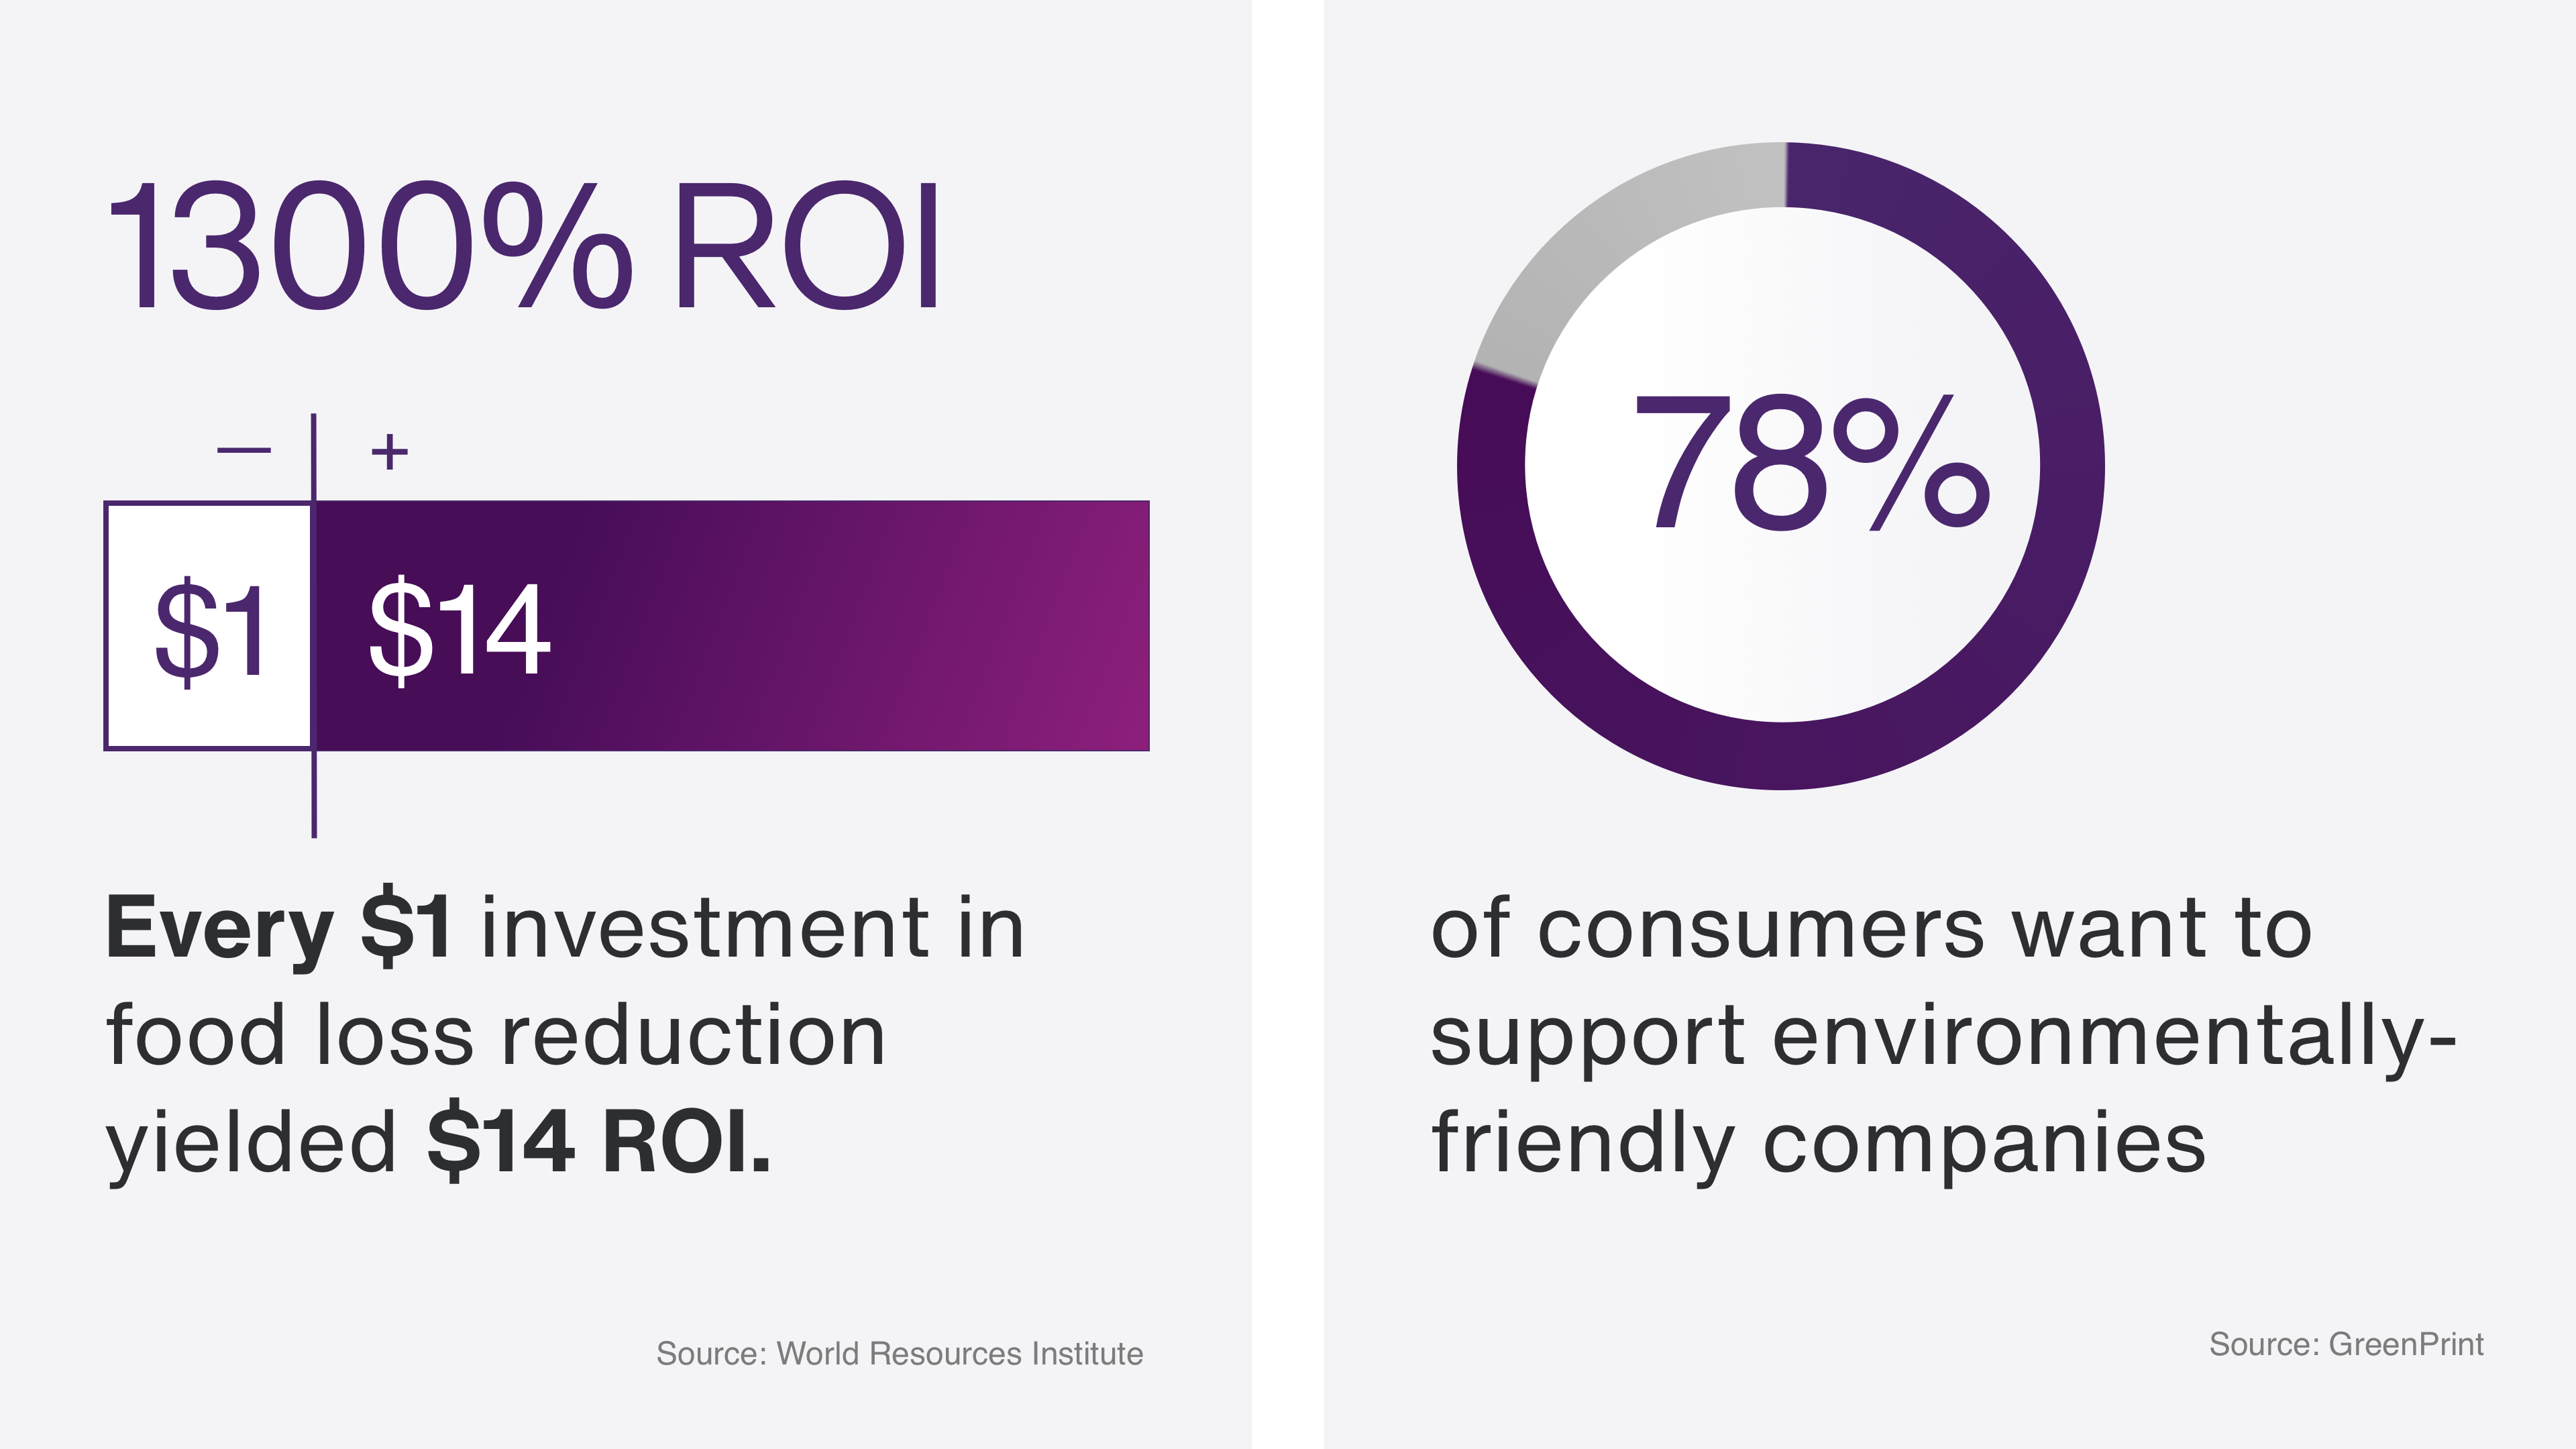 Text on left reads:
1,300%ROI

$1 = $14
Every $1 investment in food loss reduction yielded $14 ROI 

Source: World Resources Institute

Text on right reads:
78% 
of consumers want to support environmentally-friendly companies 

Source: GreenPrint